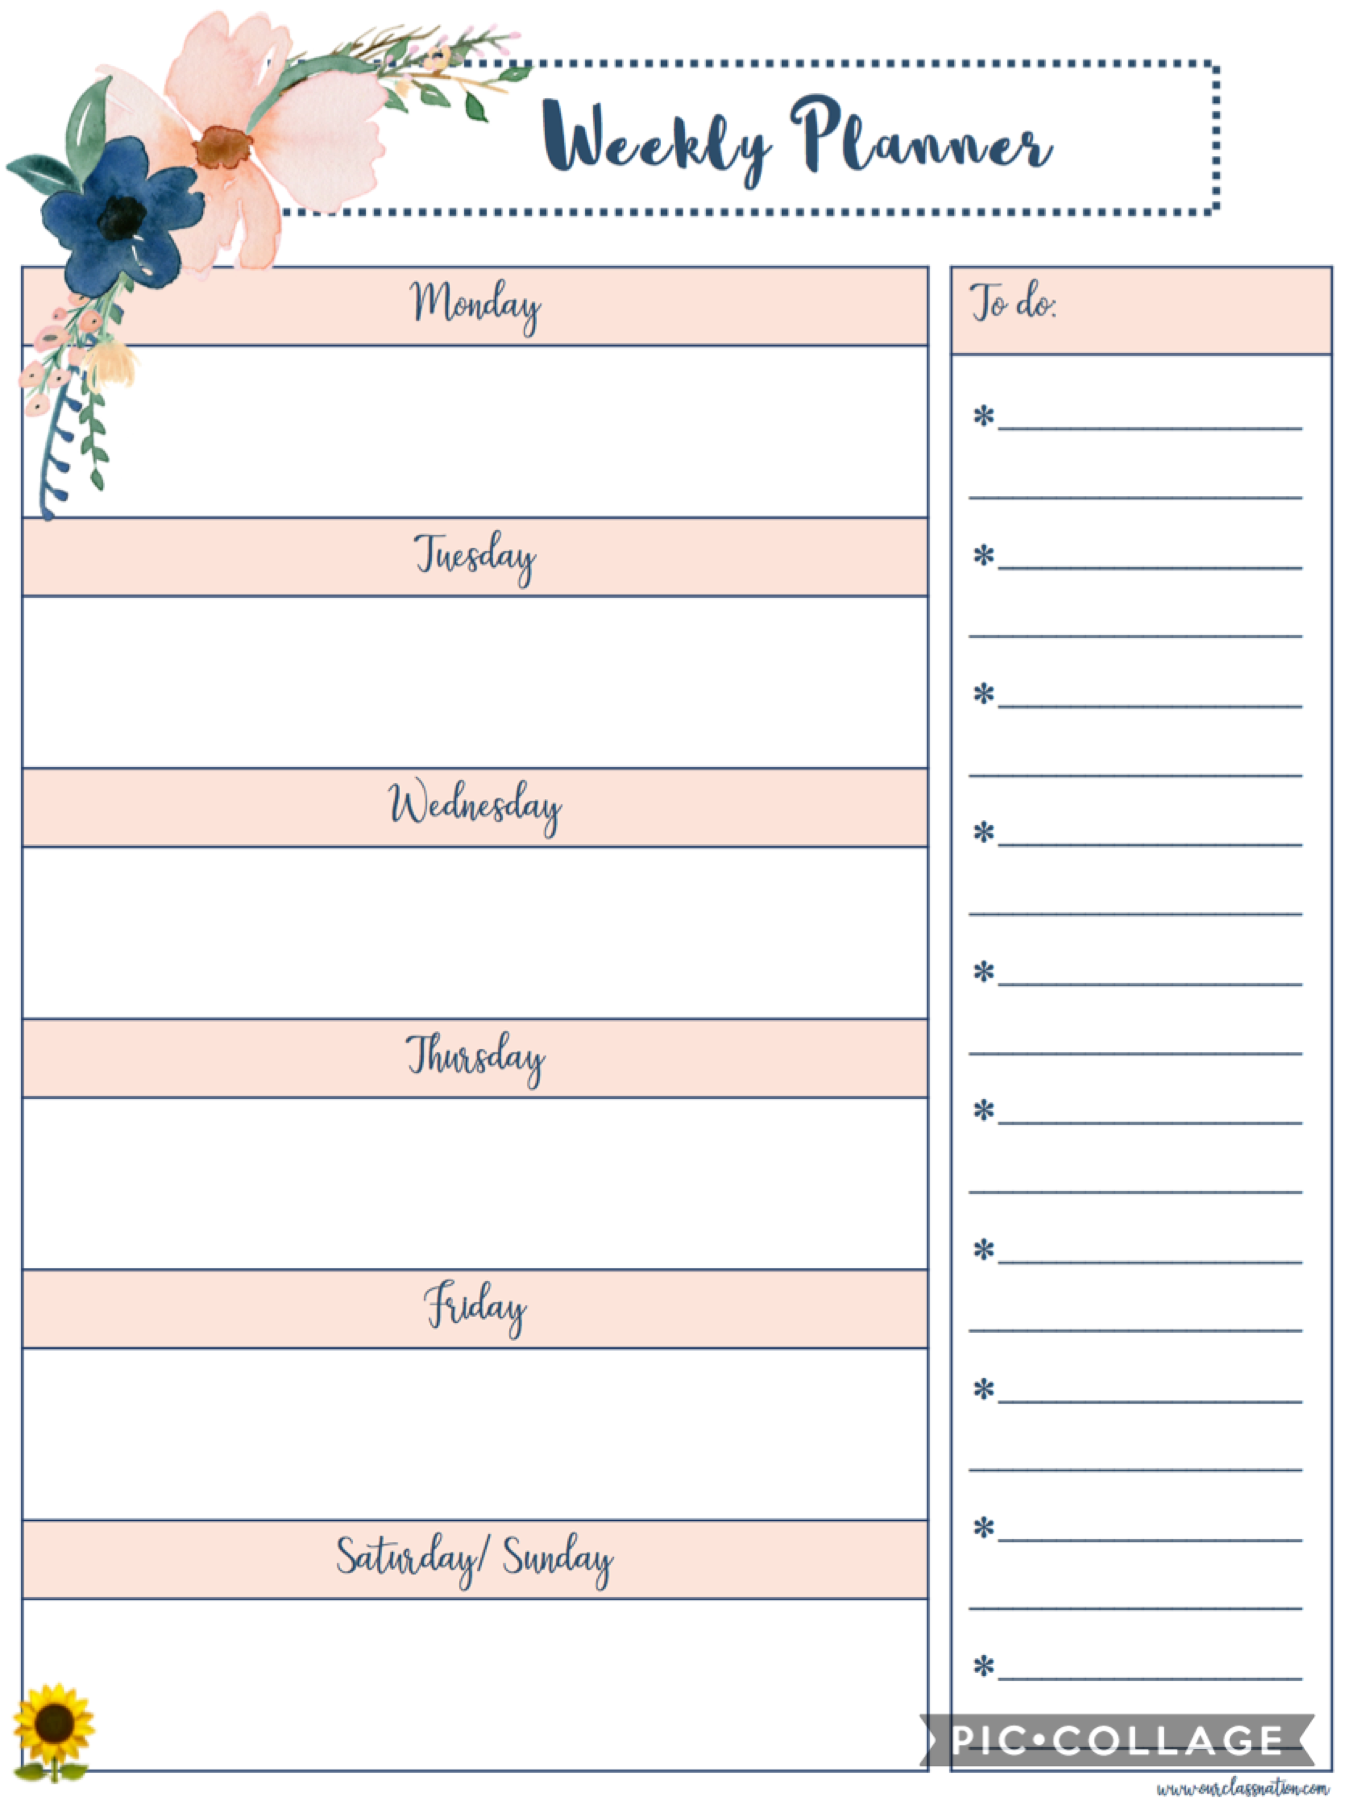 🌻🌻🌻TAP🌻🌻🌻

Weekly planner! Help yourself to copying it, and using it! Share with others ! 
plz give credit to
@-Aesthetic_Sunflower-
(aka me)!